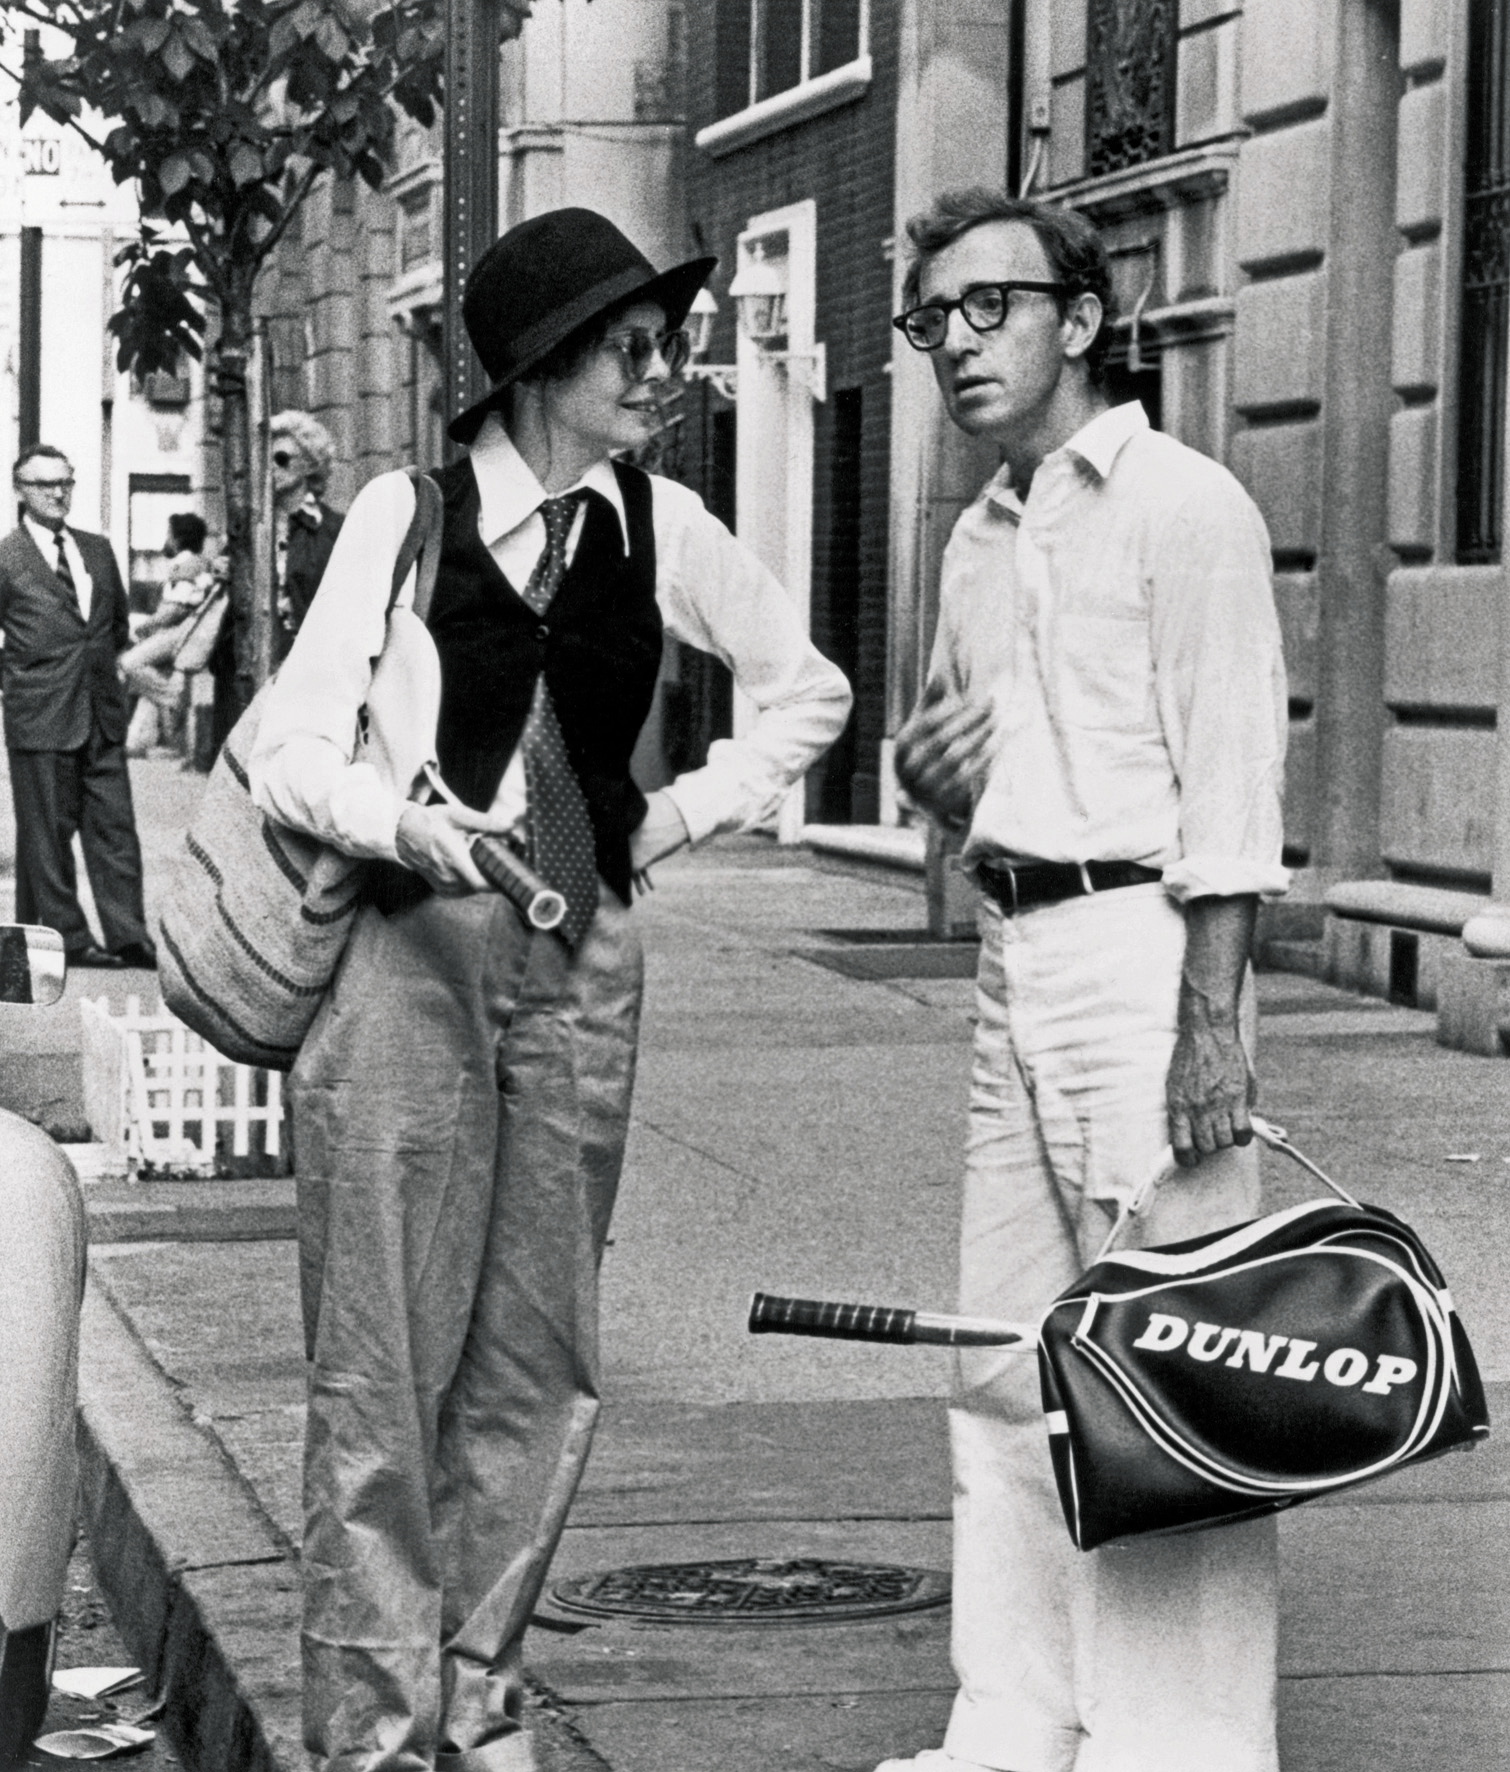   © The Stylish Life - Tennis, published by teNeues, www.teneues.com. Diane Keaton and Woody Allen in Annie Hall, Photo © Bettmann/CORBIS.  